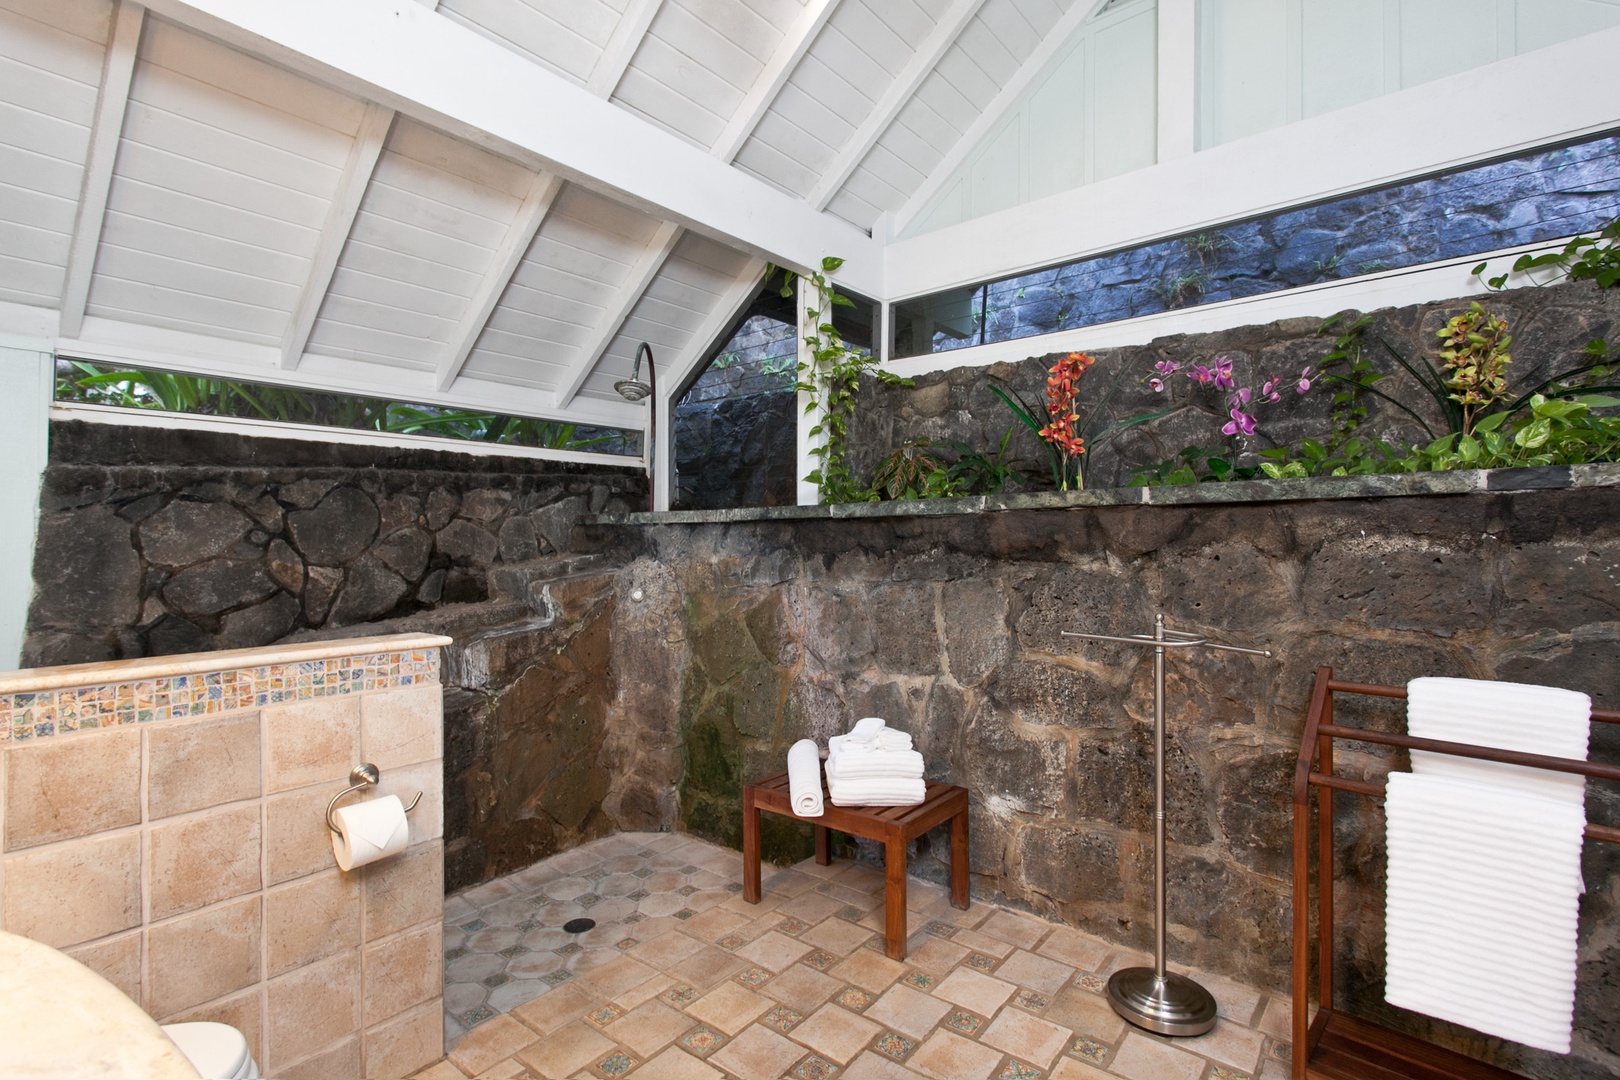 Kailua Vacation Rentals, Hale Kainalu* - The walk-in shower has a tropical feel!